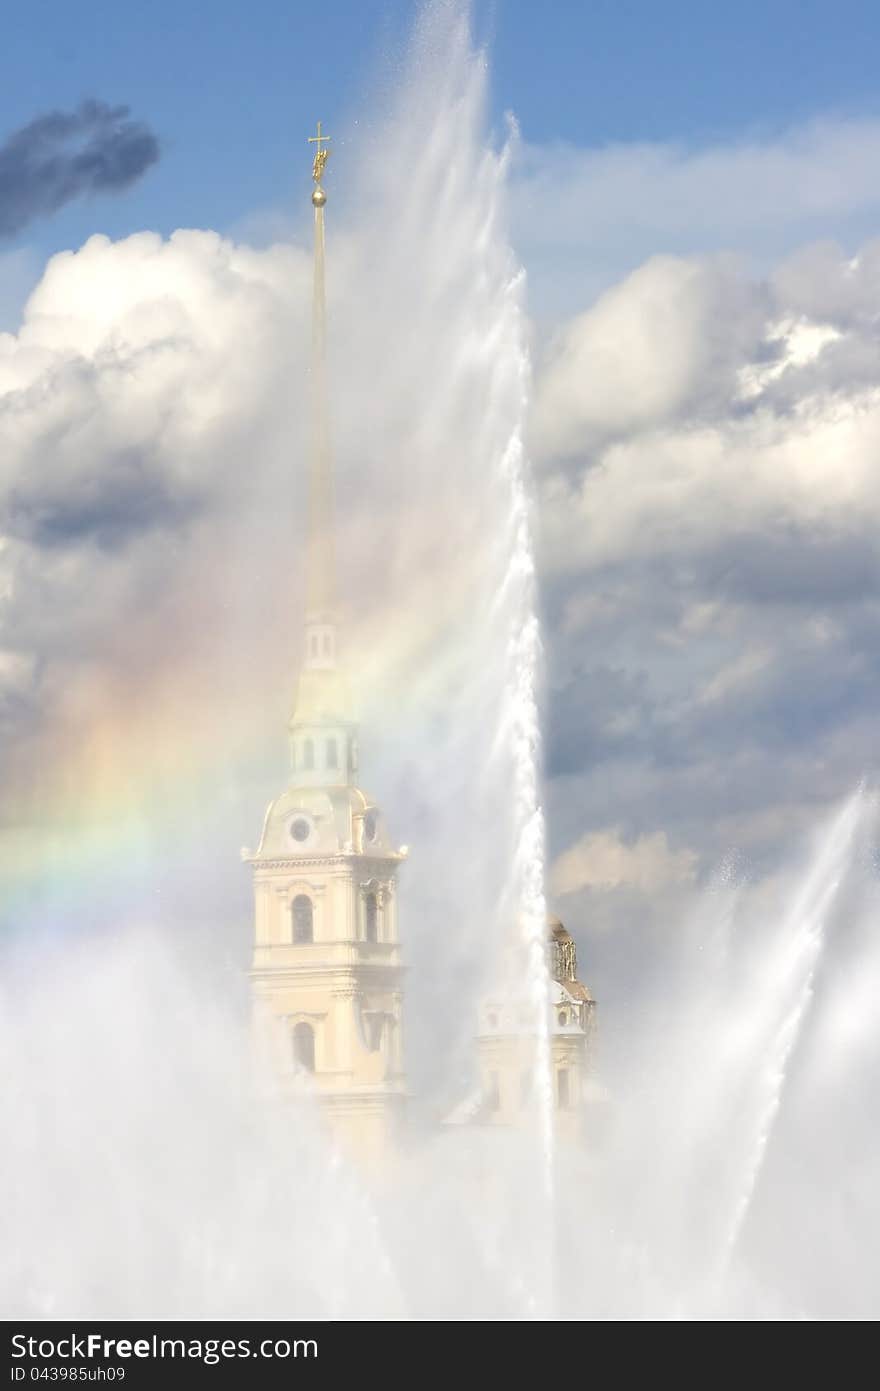 Water jet from floating fountain, The Peter and Paul fortress at background